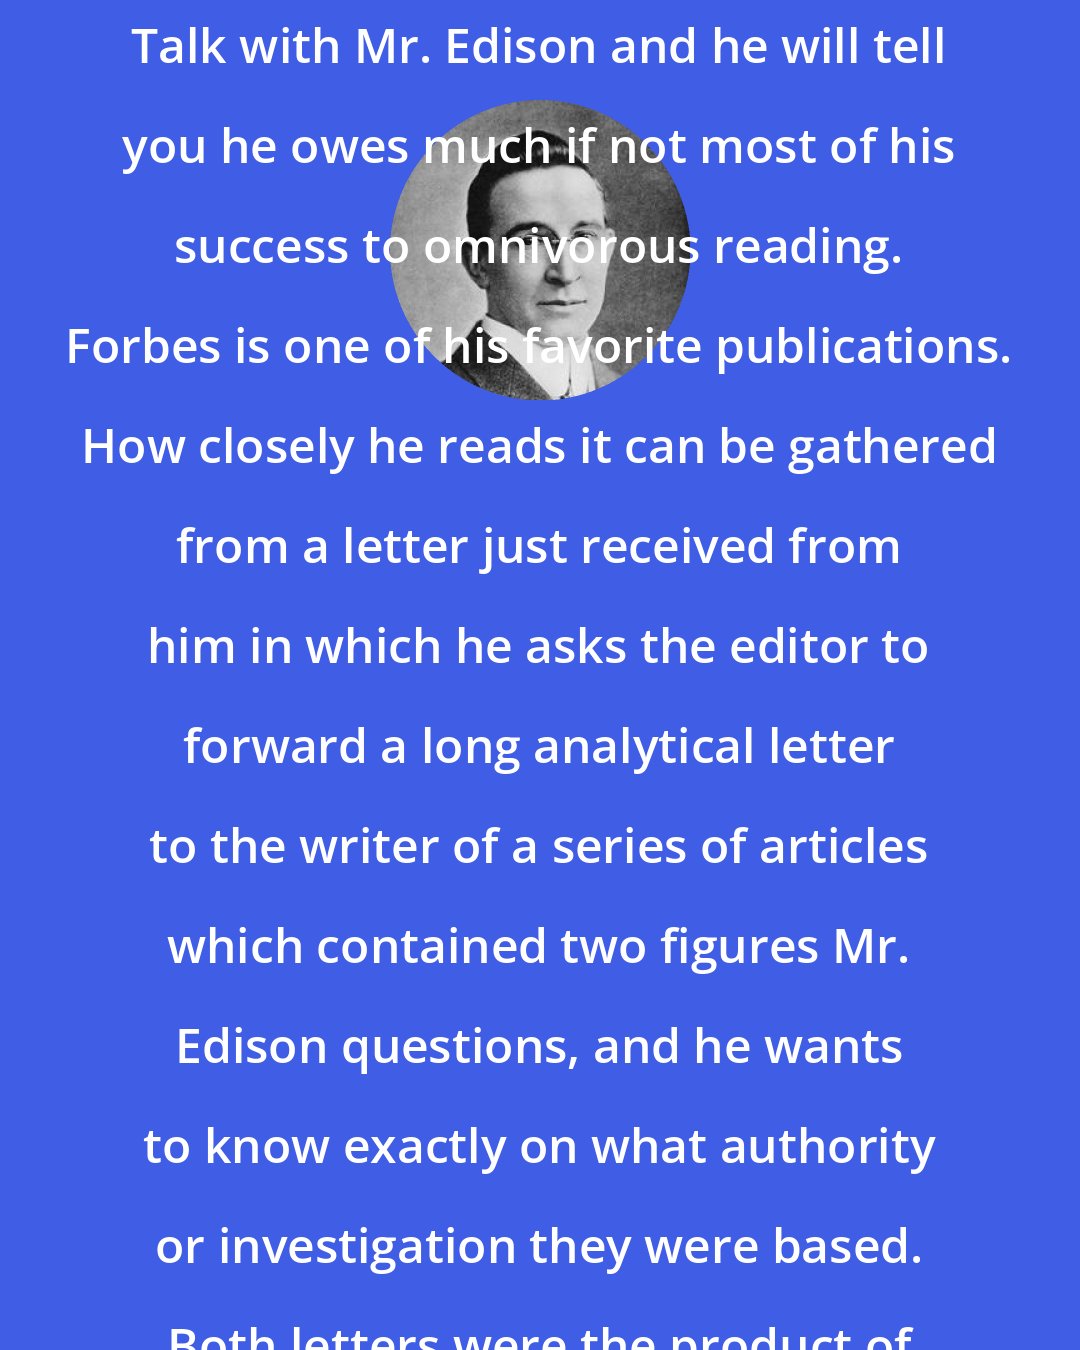 B. C. Forbes: The most famous self-made man in the world today is our own Edison. Talk with Mr. Edison and he will tell you he owes much if not most of his success to omnivorous reading. Forbes is one of his favorite publications. How closely he reads it can be gathered from a letter just received from him in which he asks the editor to forward a long analytical letter to the writer of a series of articles which contained two figures Mr. Edison questions, and he wants to know exactly on what authority or investigation they were based. Both letters were the product of Mr. Edison and were signed by him.